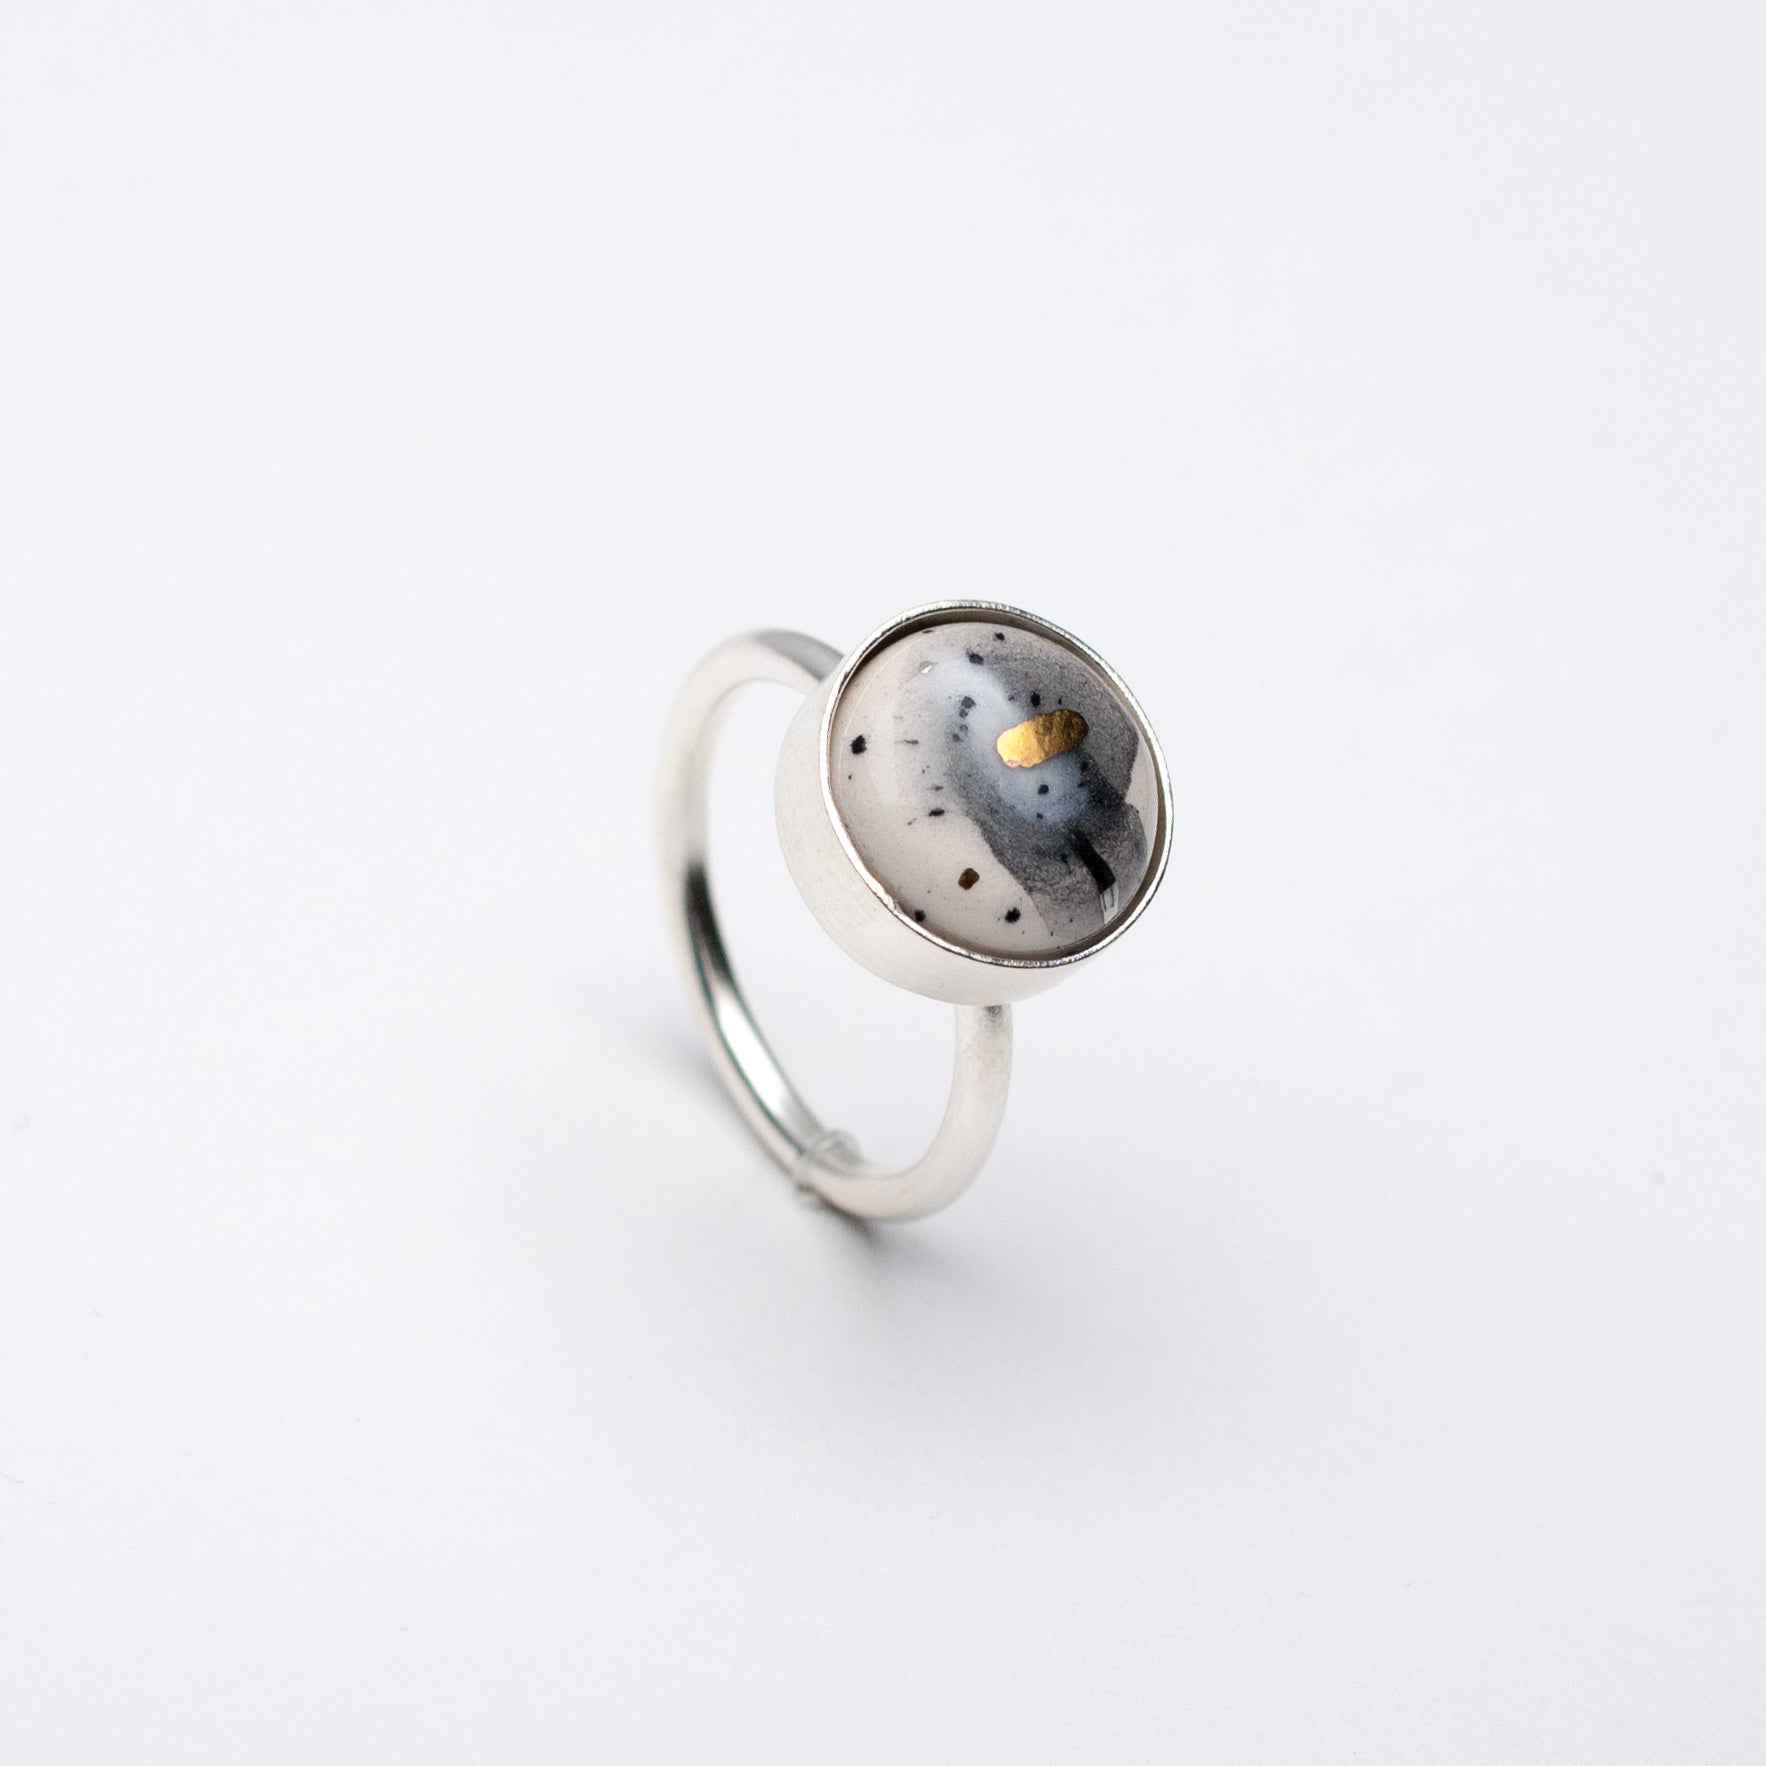 17.5 size ring EBY